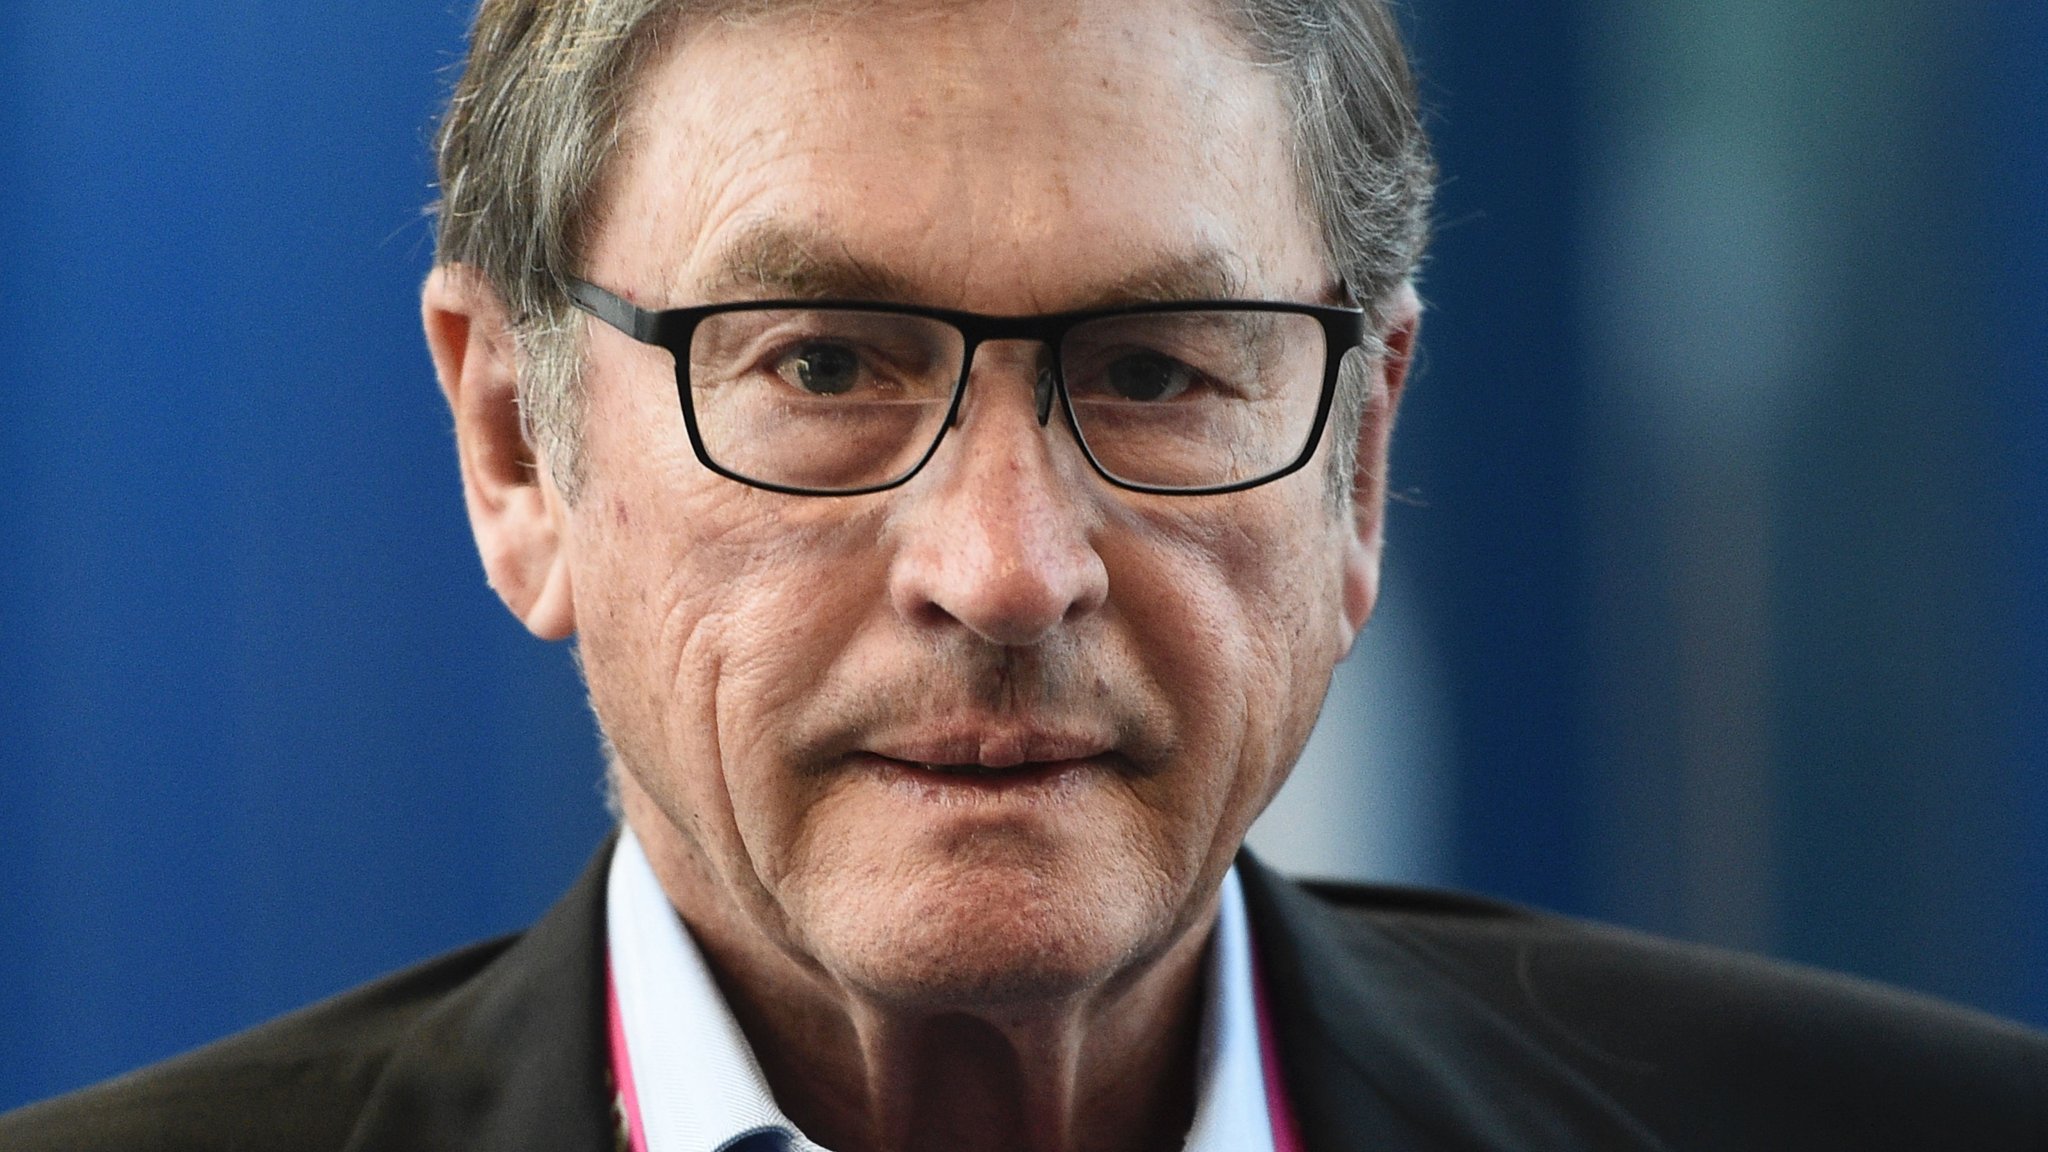 Michael Ashcroft Net Worth - From Business Ventures To Politics